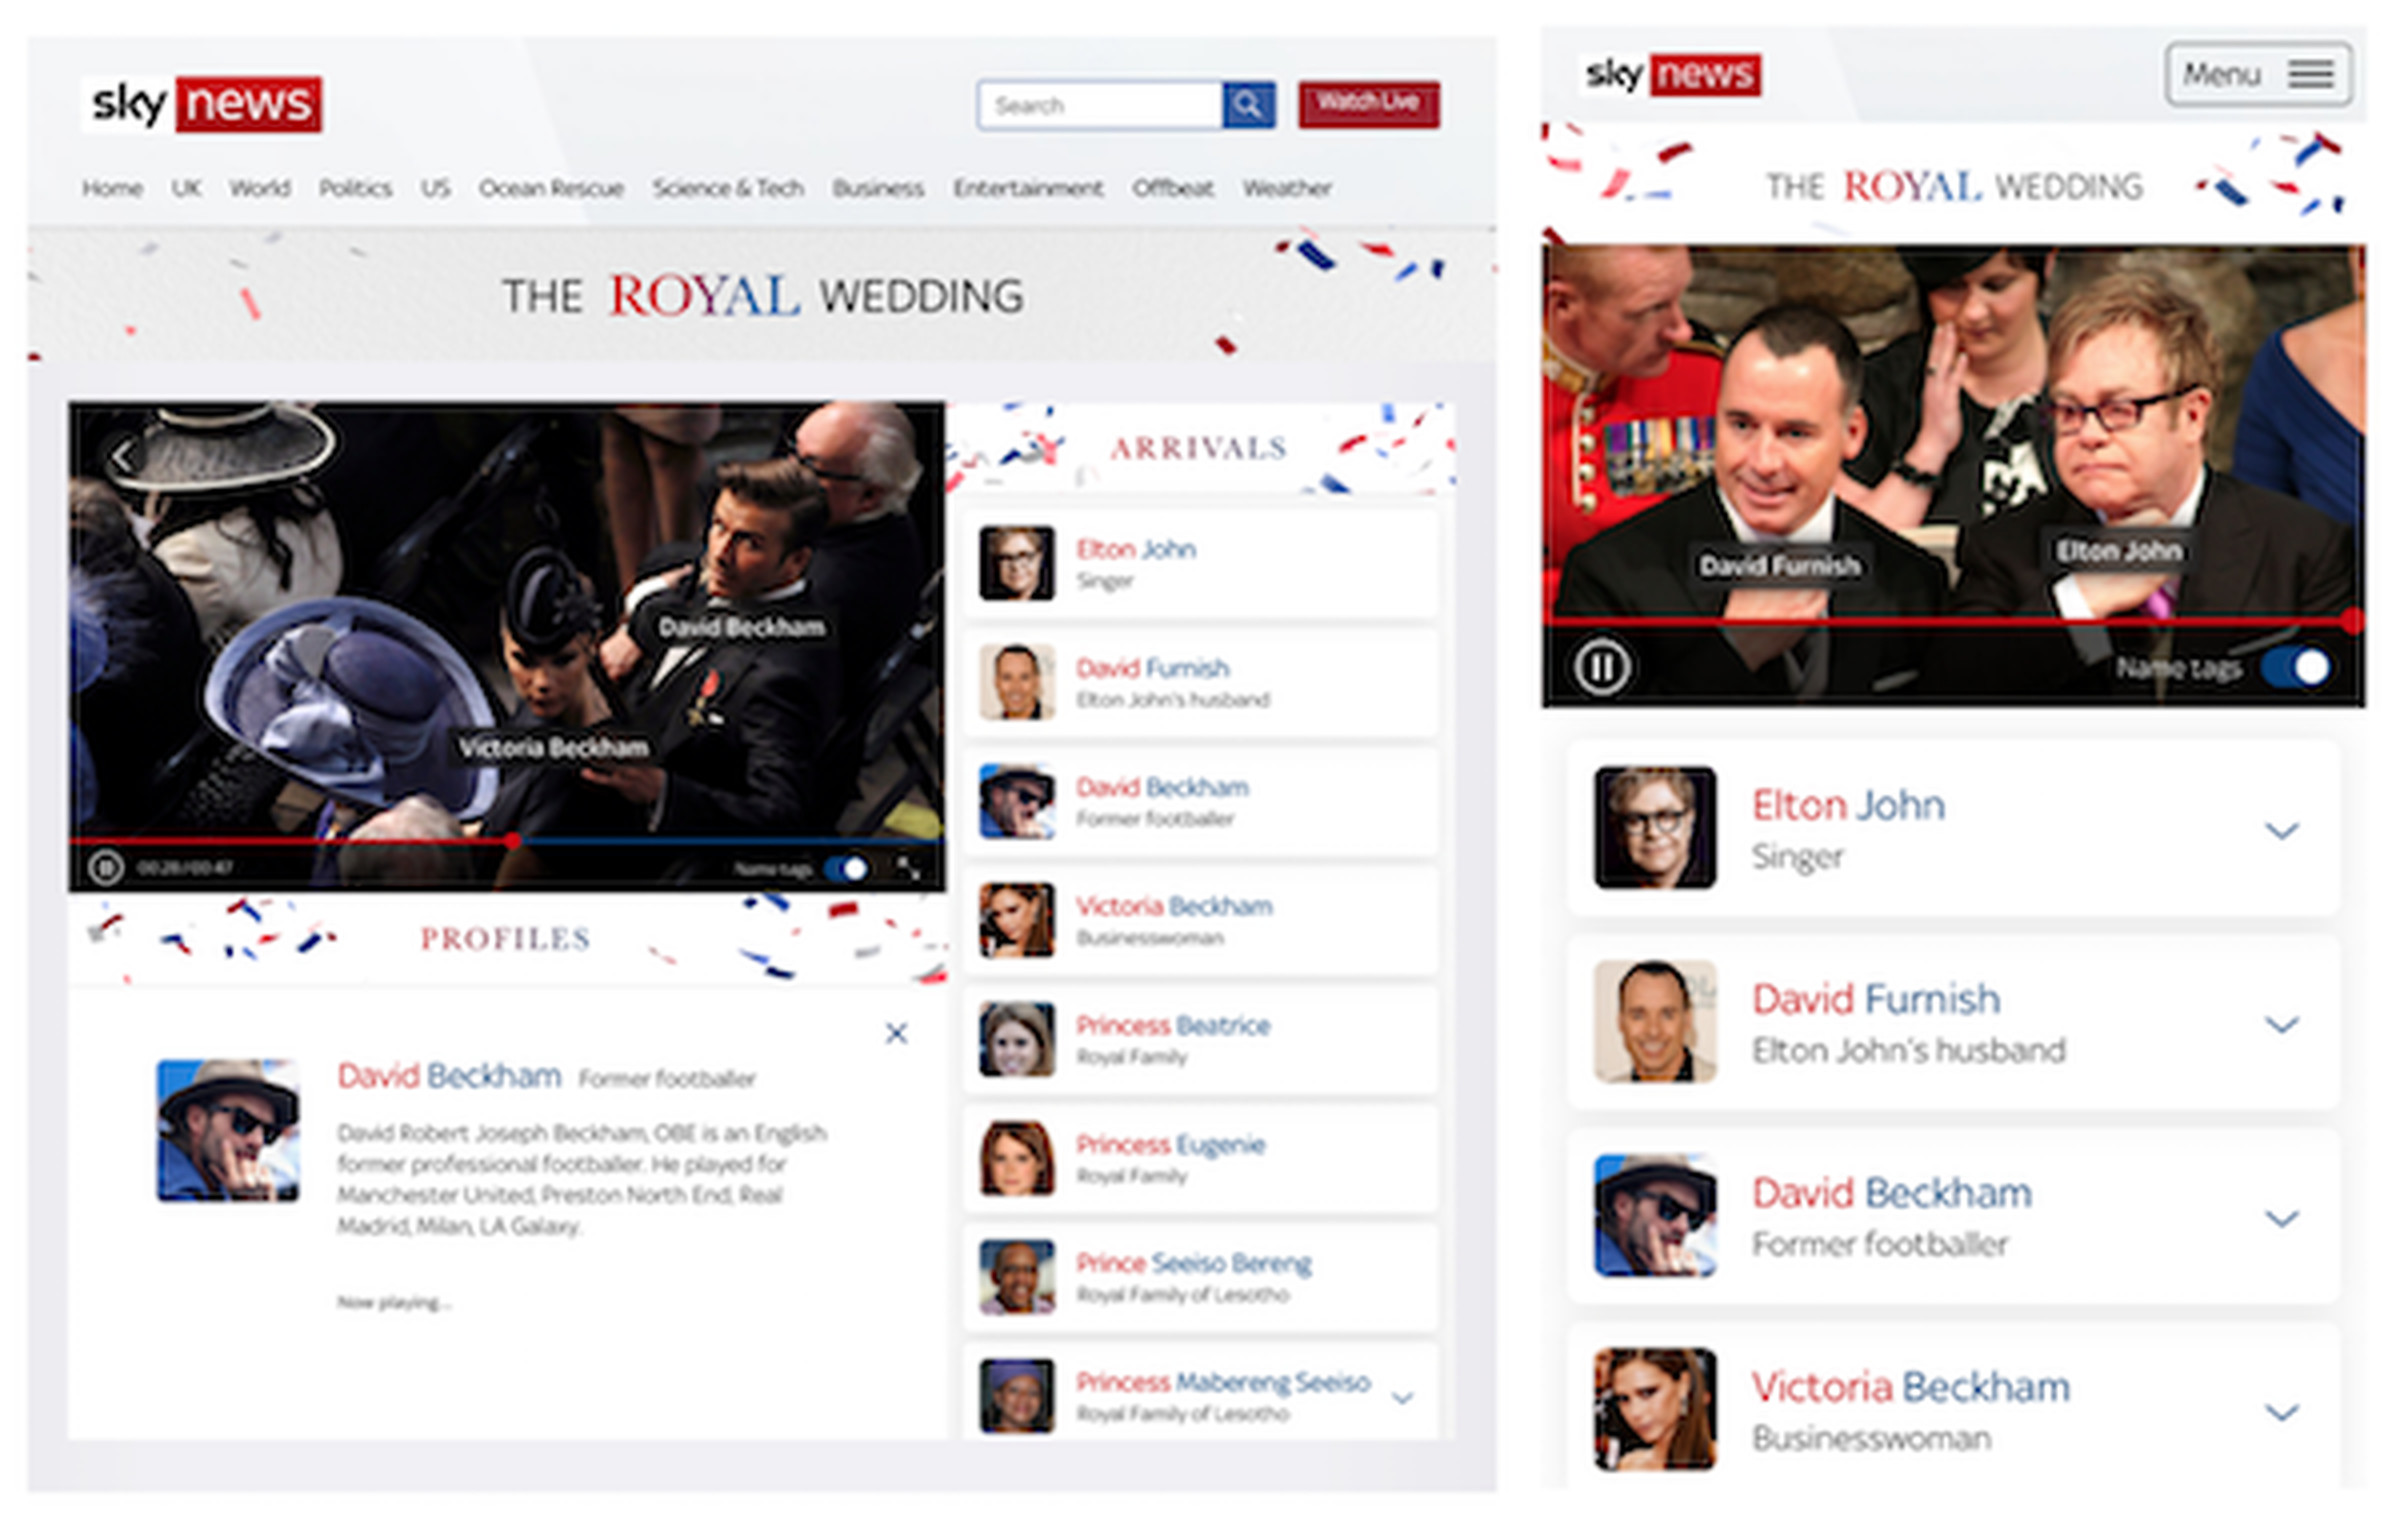 Facial recognition has become easier than ever for companies to use. Amazon’s Rekognition API was used by UK broadcaster Sky to identify celebrities at the royal wedding in May. 